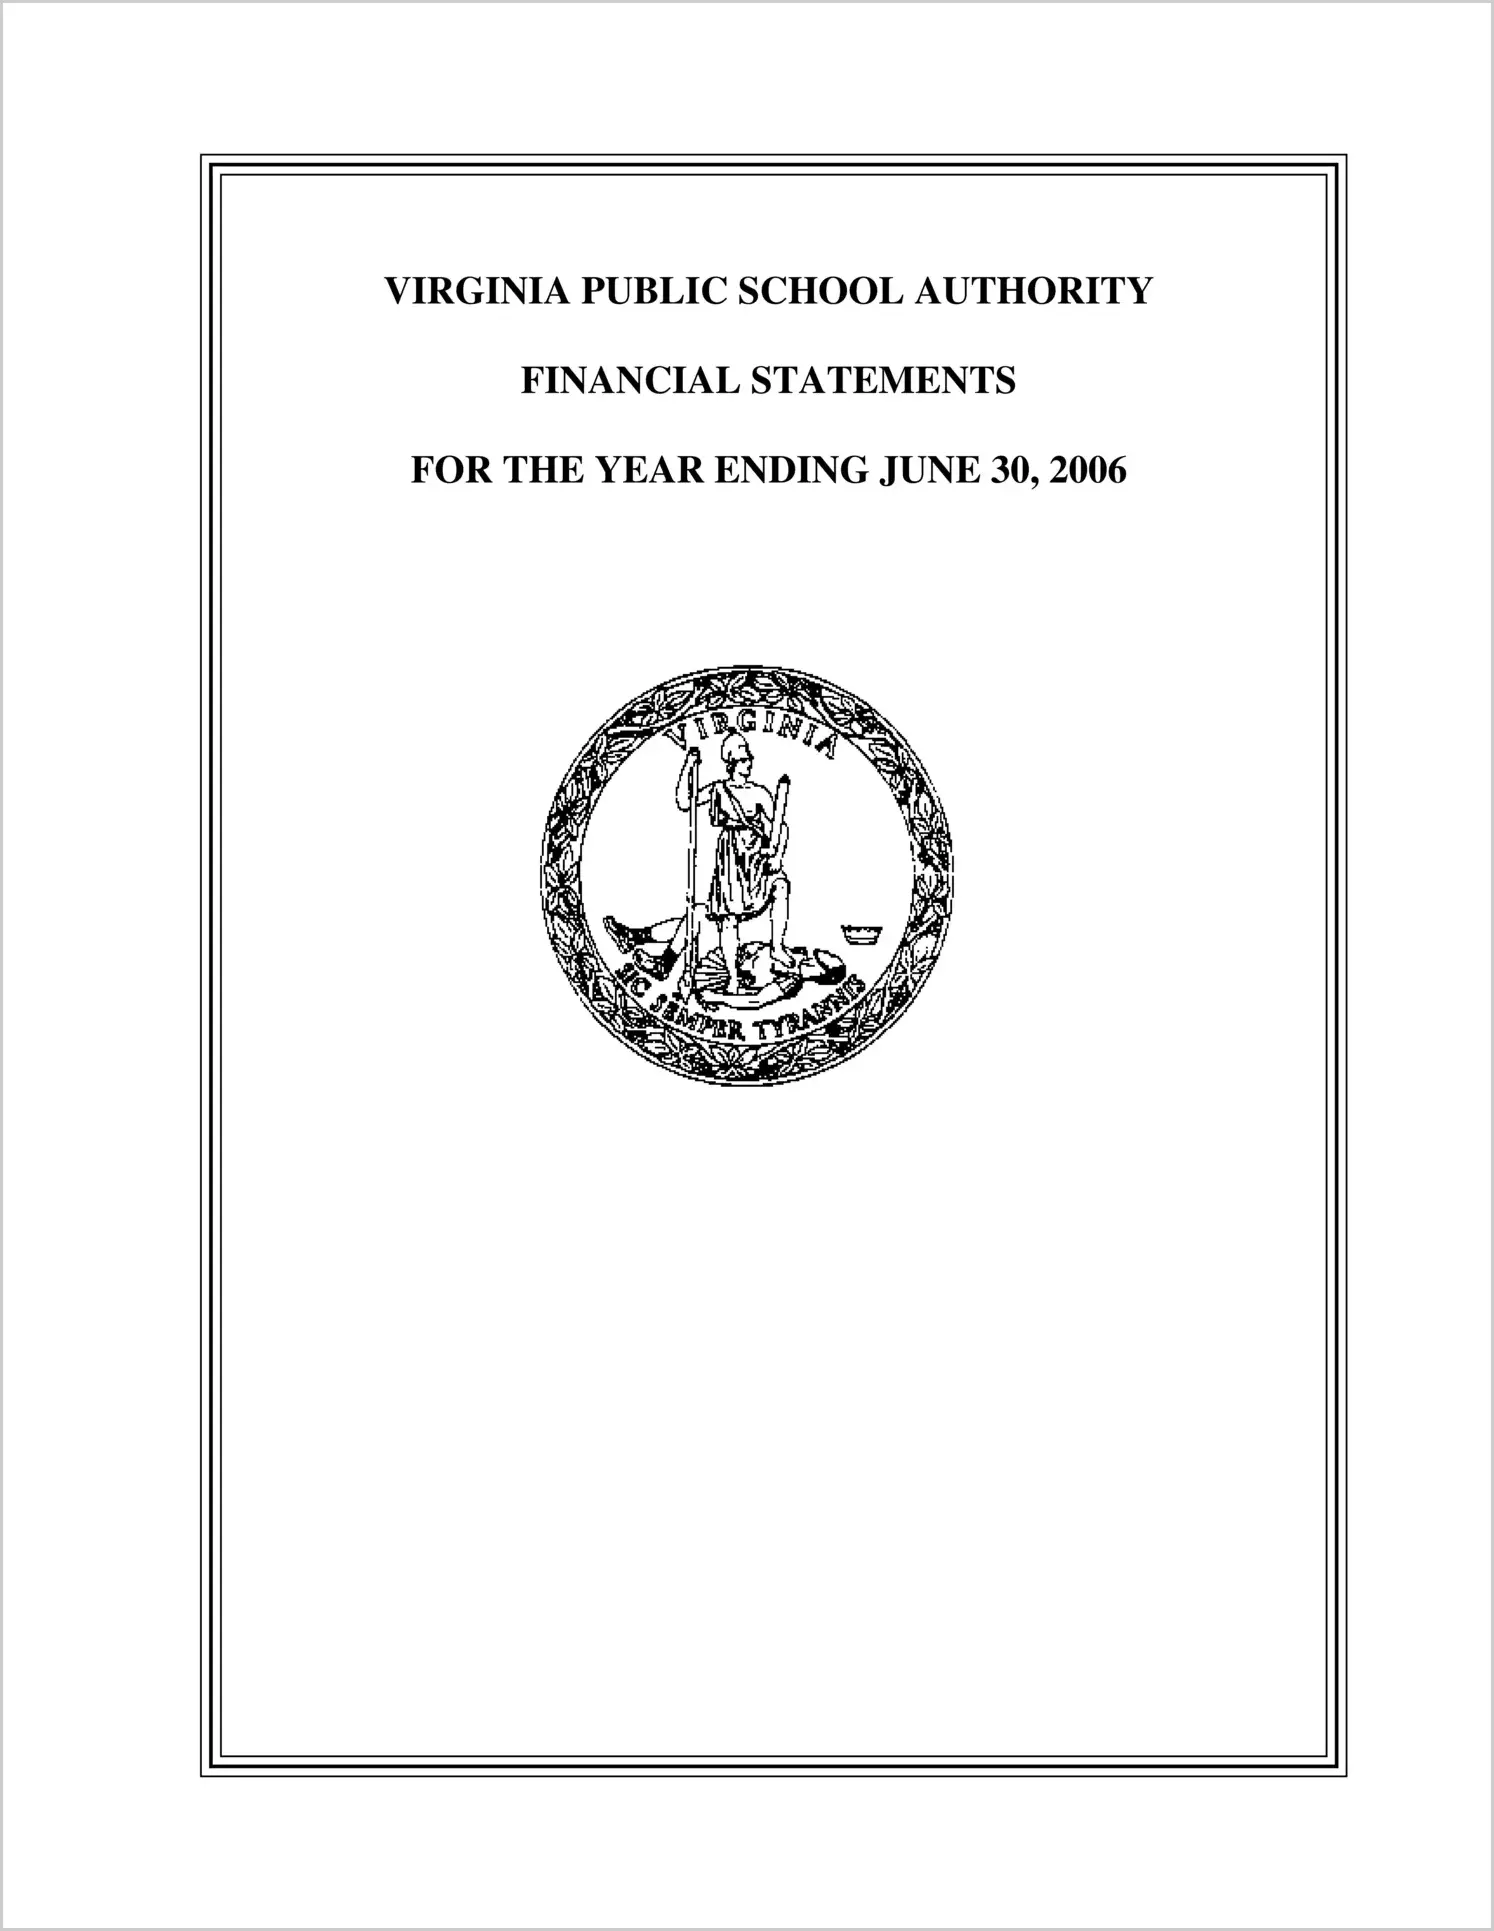 Virginia Public School Authority Financial Statements for the year ended June 30, 2006